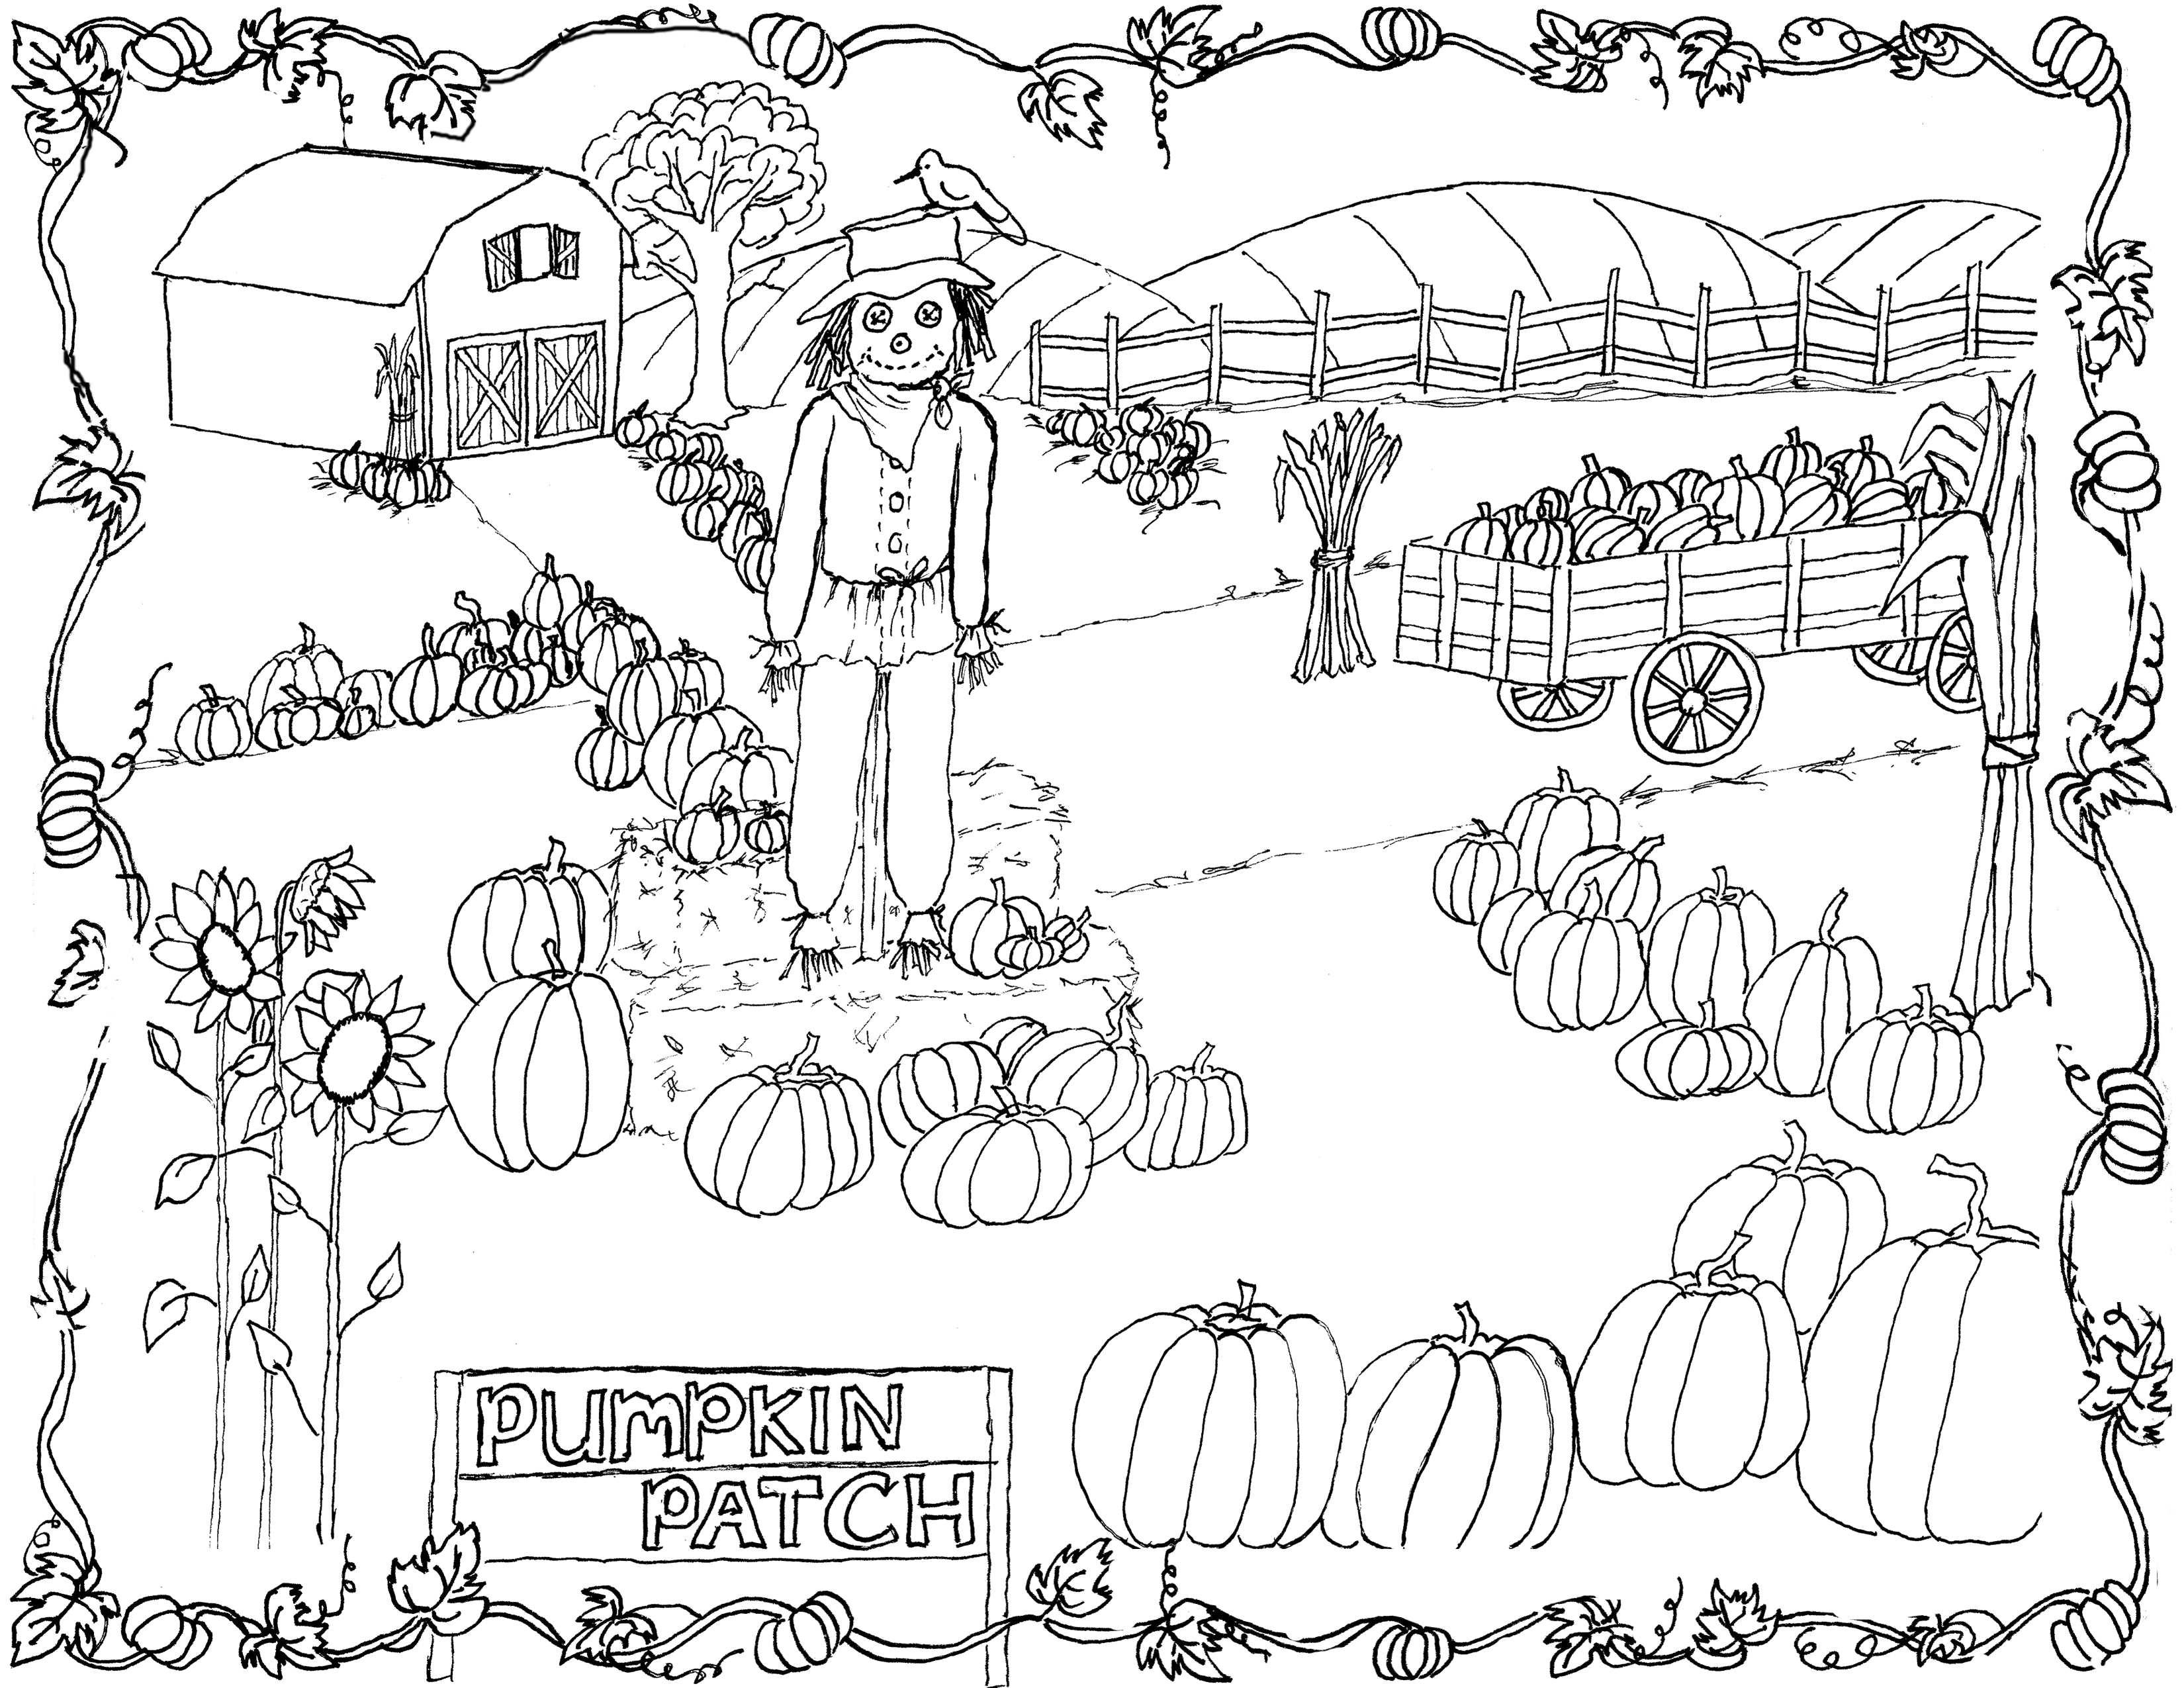 Pumpkin Patch Coloring Page Printable!.